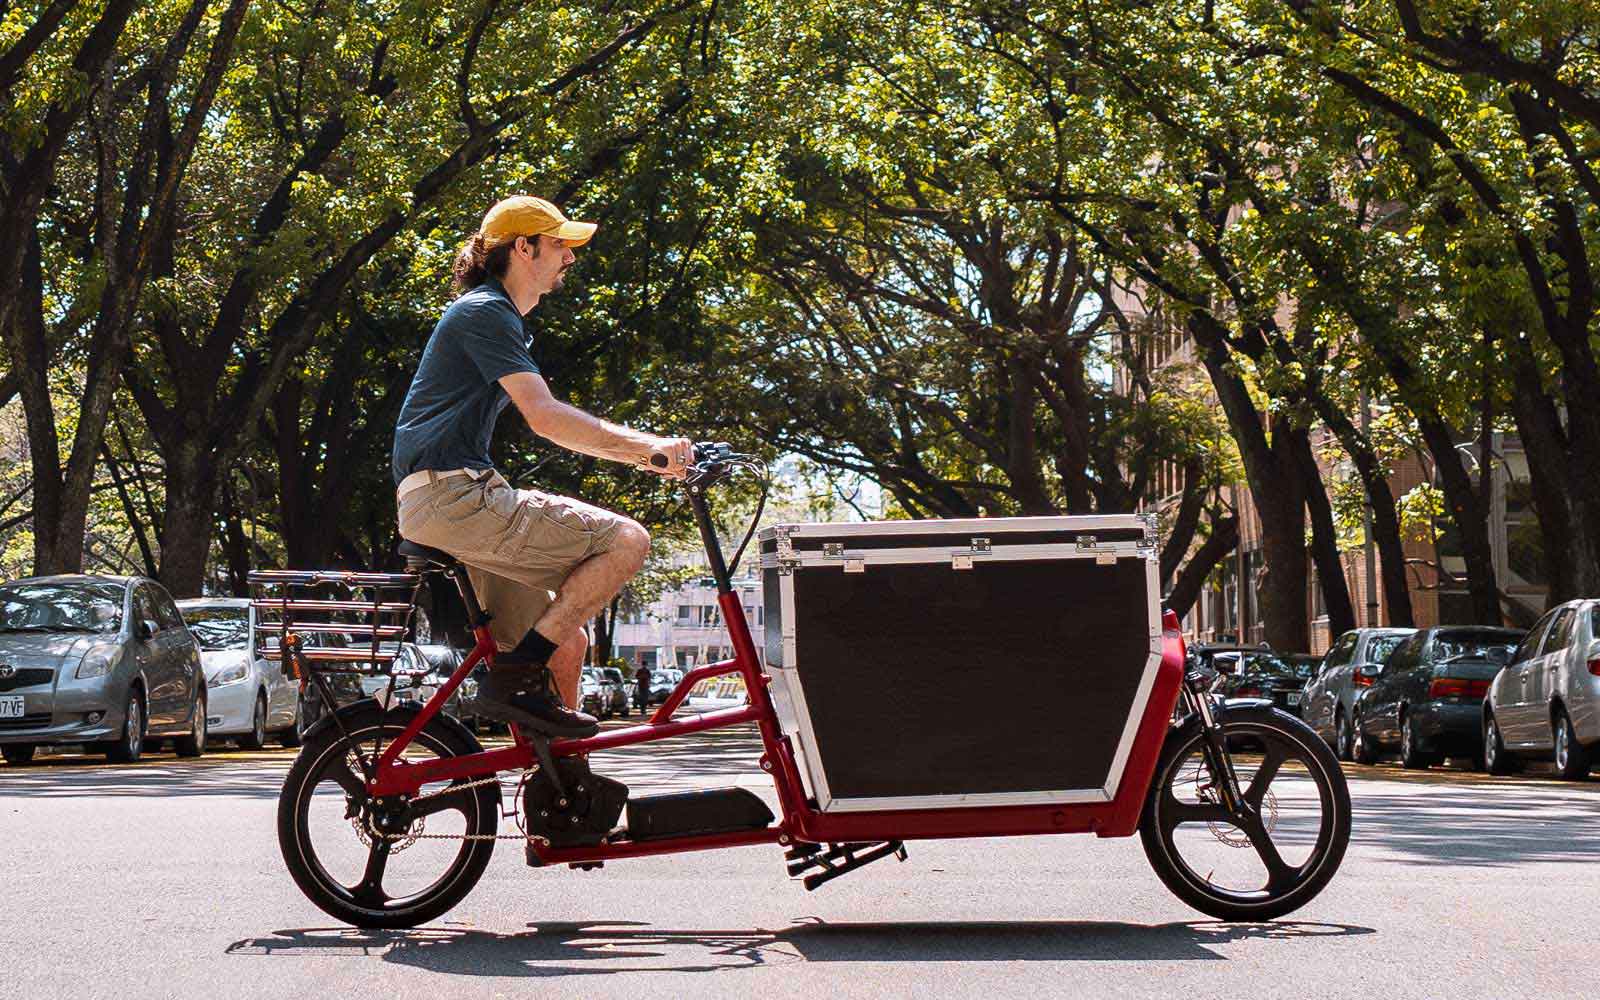 The Deliveryman ride the cargo ebike Model:Front loader